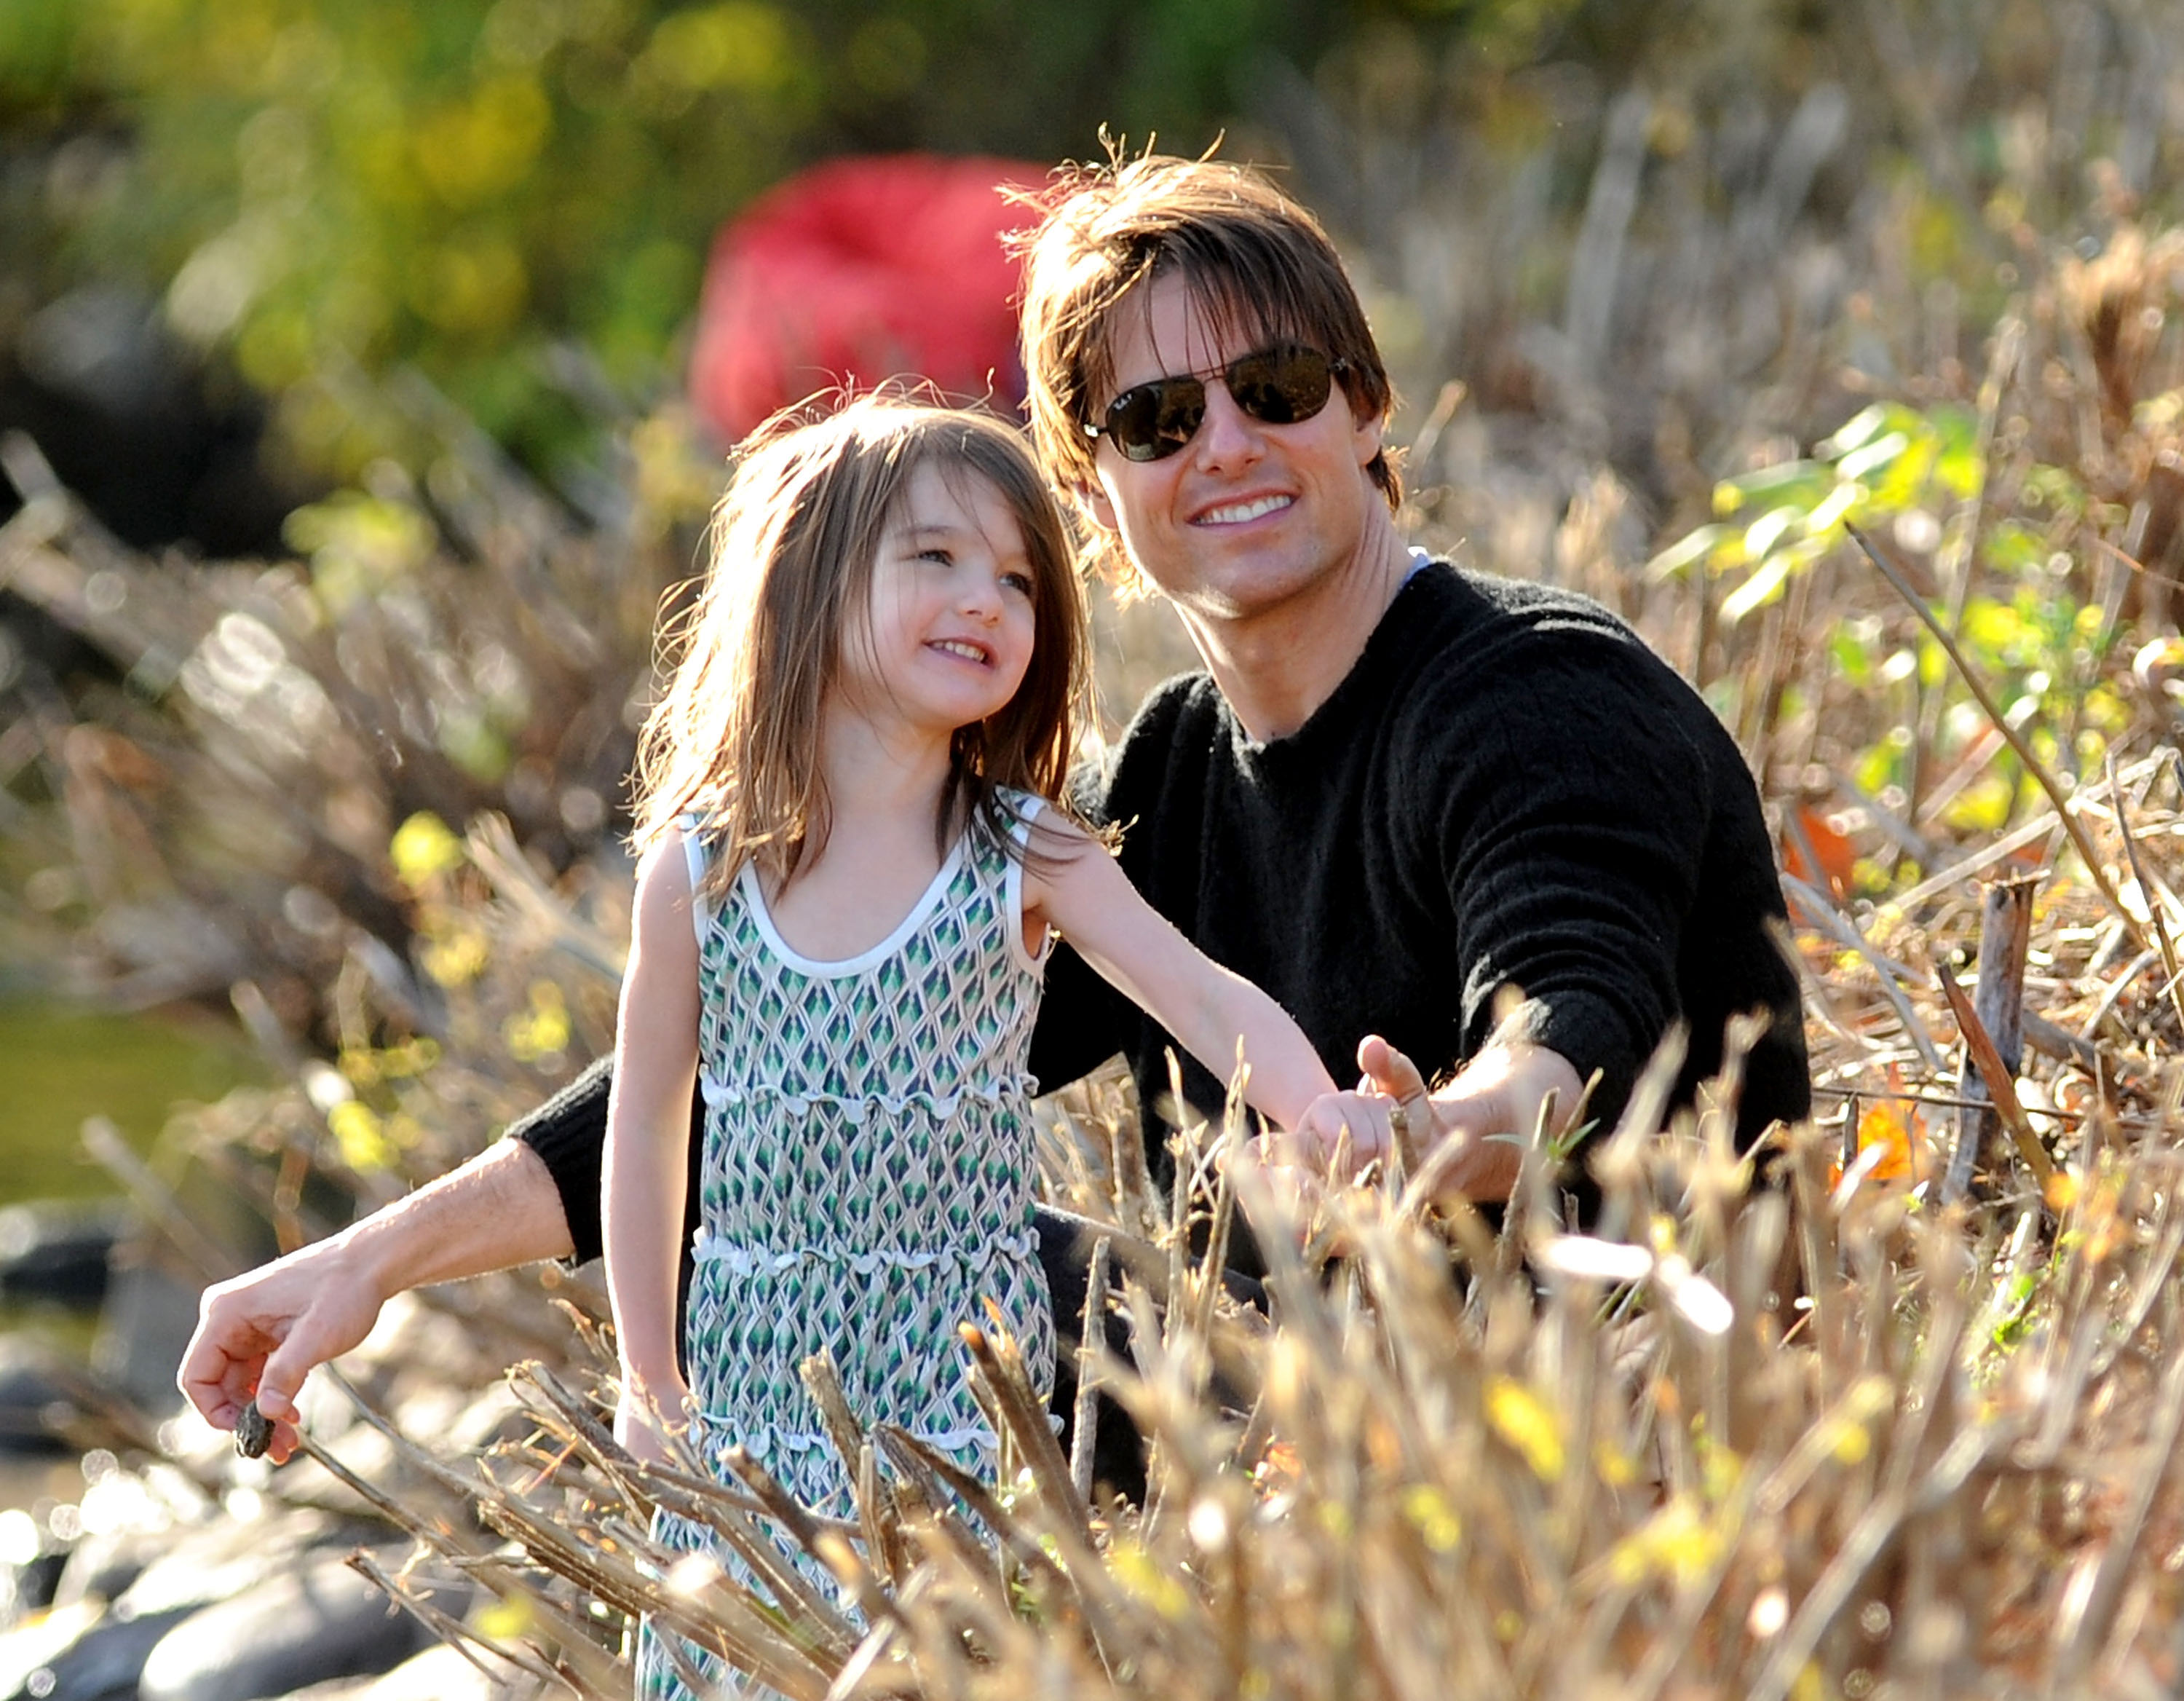 Suri Cruise and Tom Cruise on October 10, 2009 in Cambridge, Massachusetts | Source: Getty Images